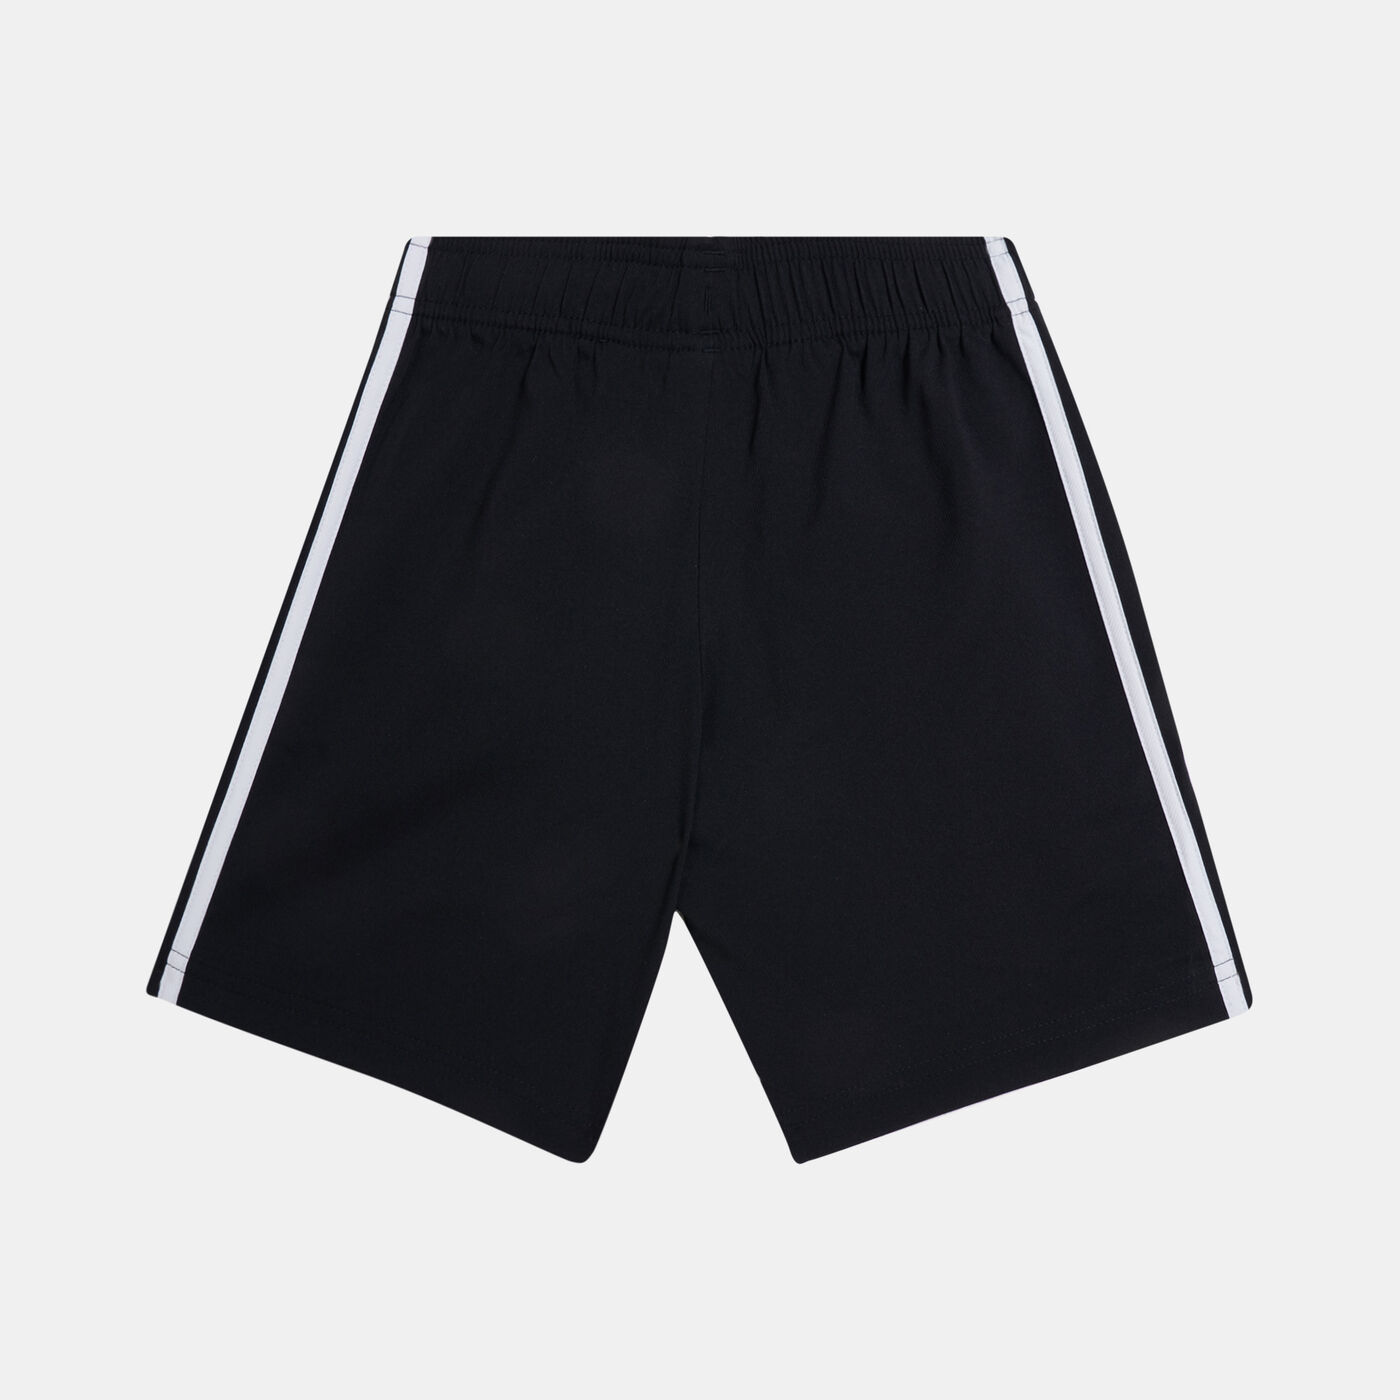 Kids' Essentials 3-Stripes Woven Shorts (Younger Kids)